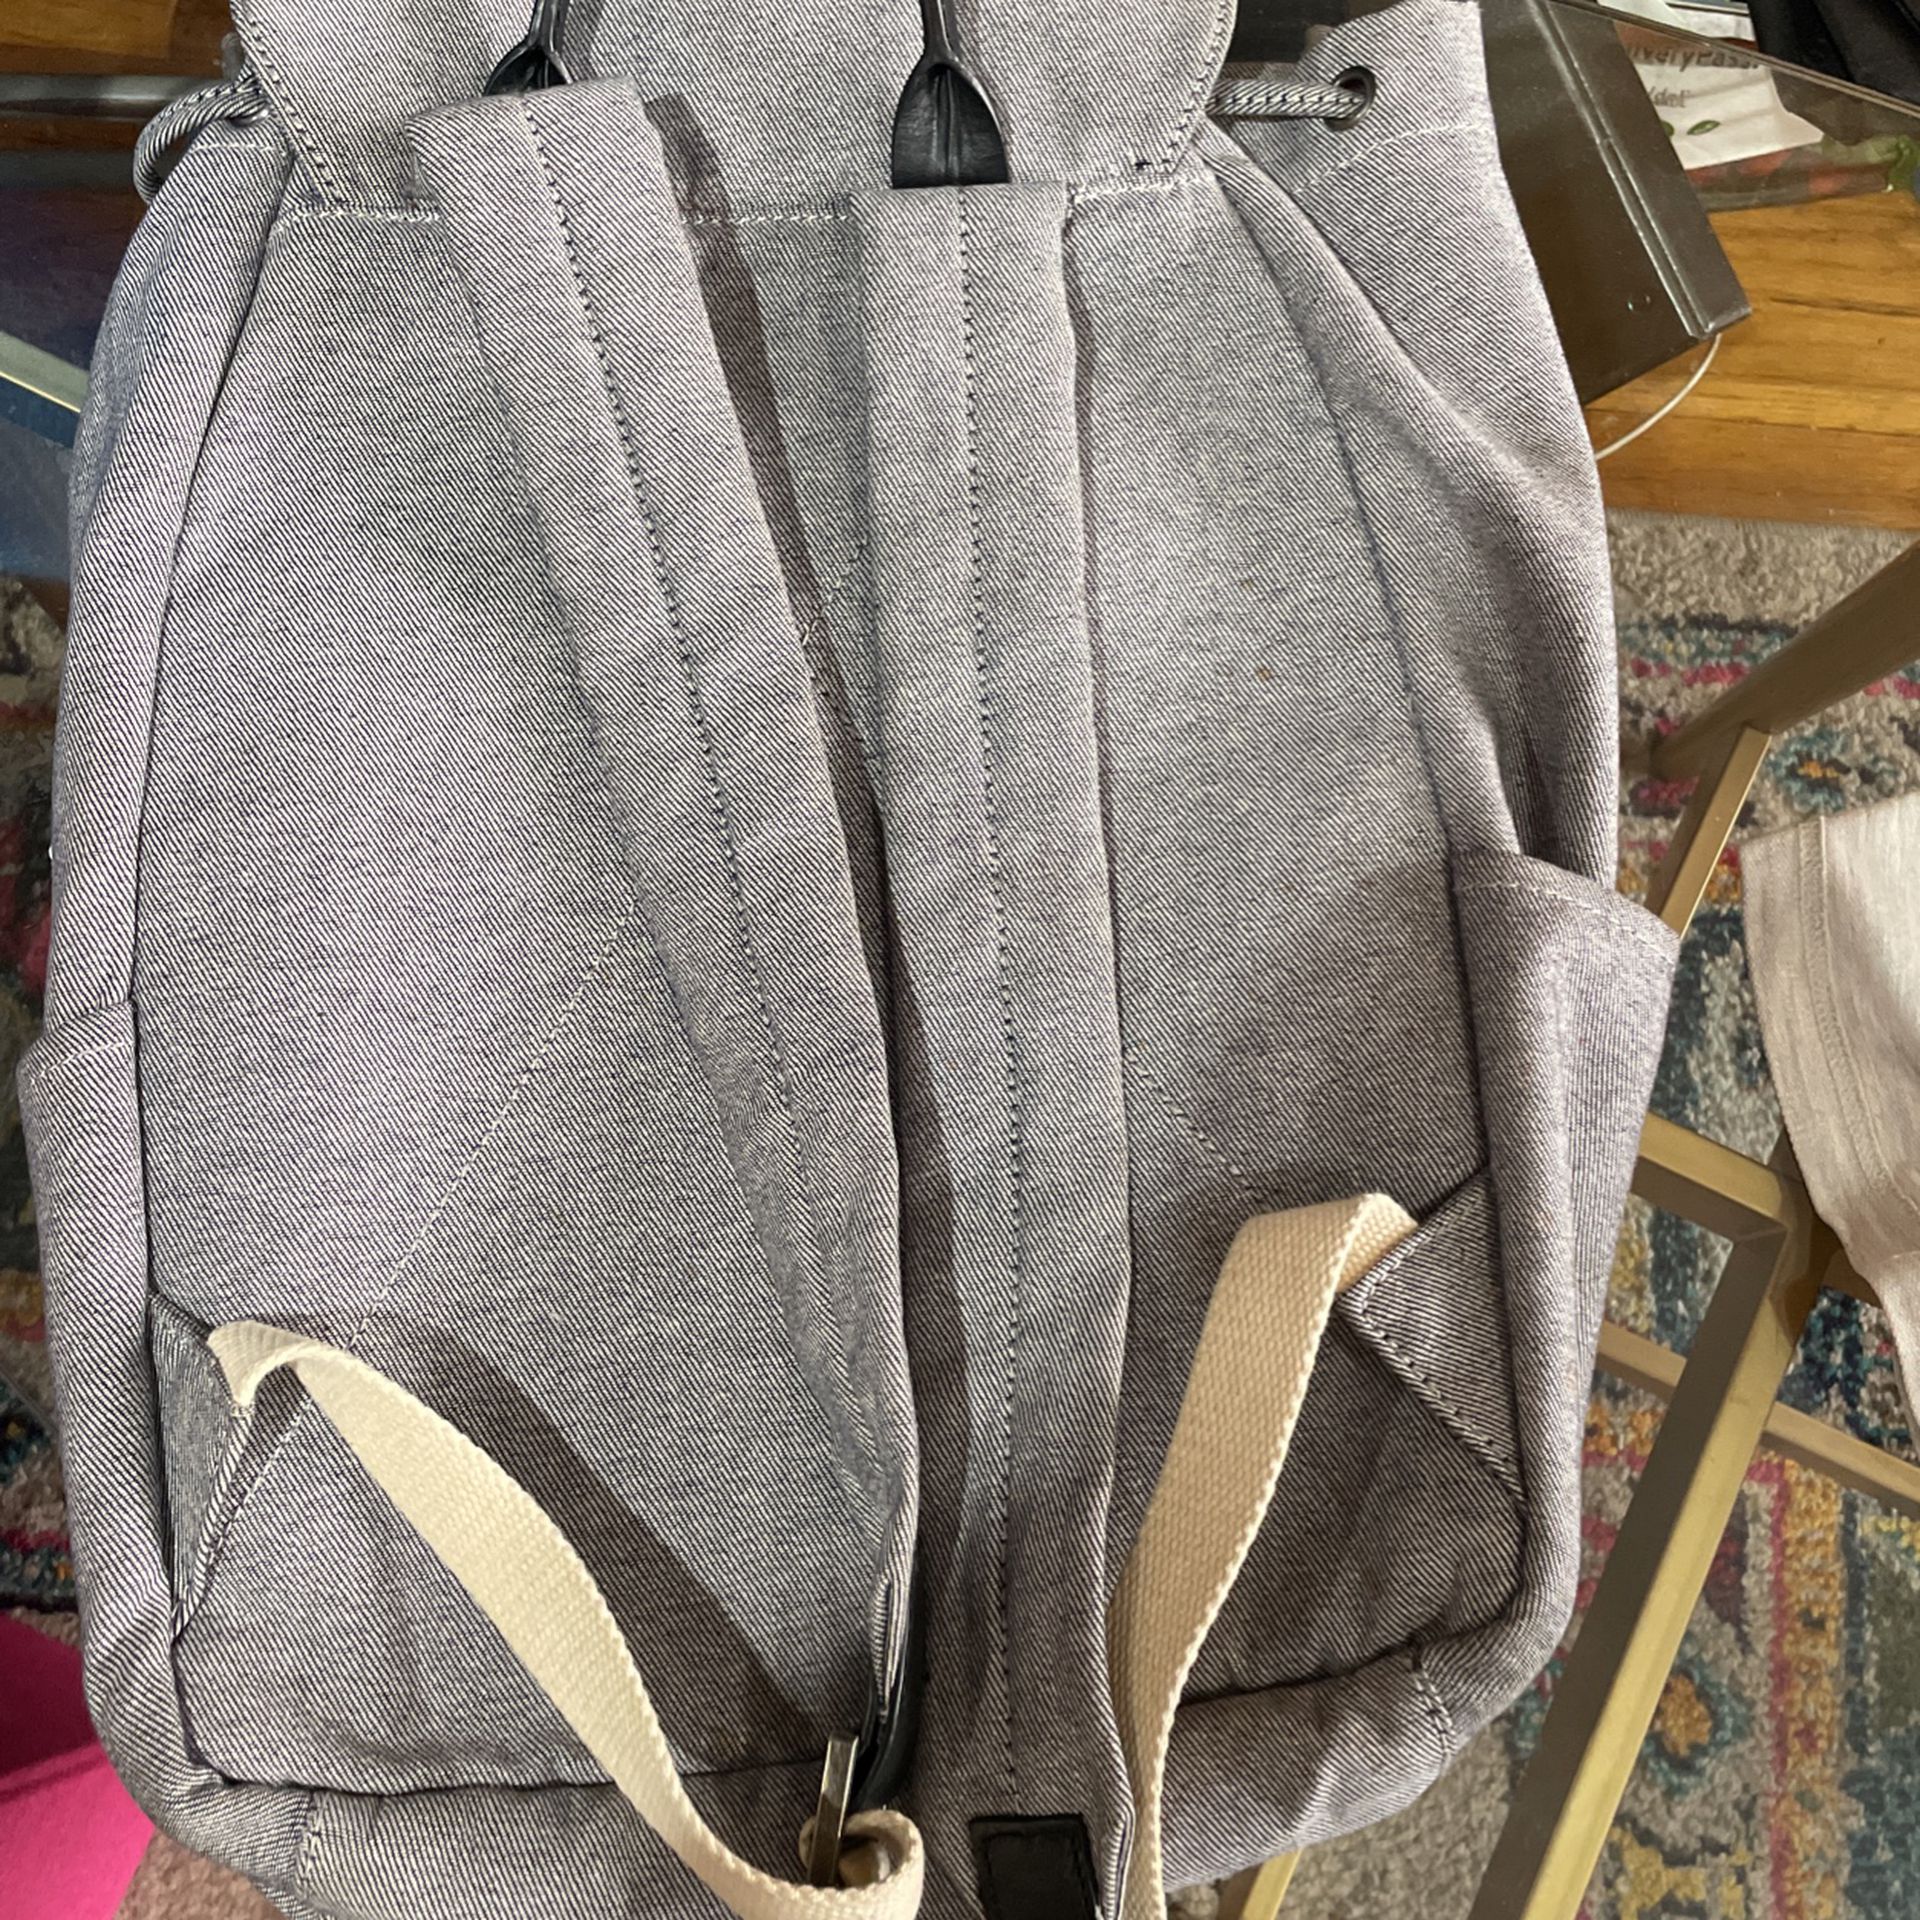 Designer Backpack for Sale in Queens, NY - OfferUp